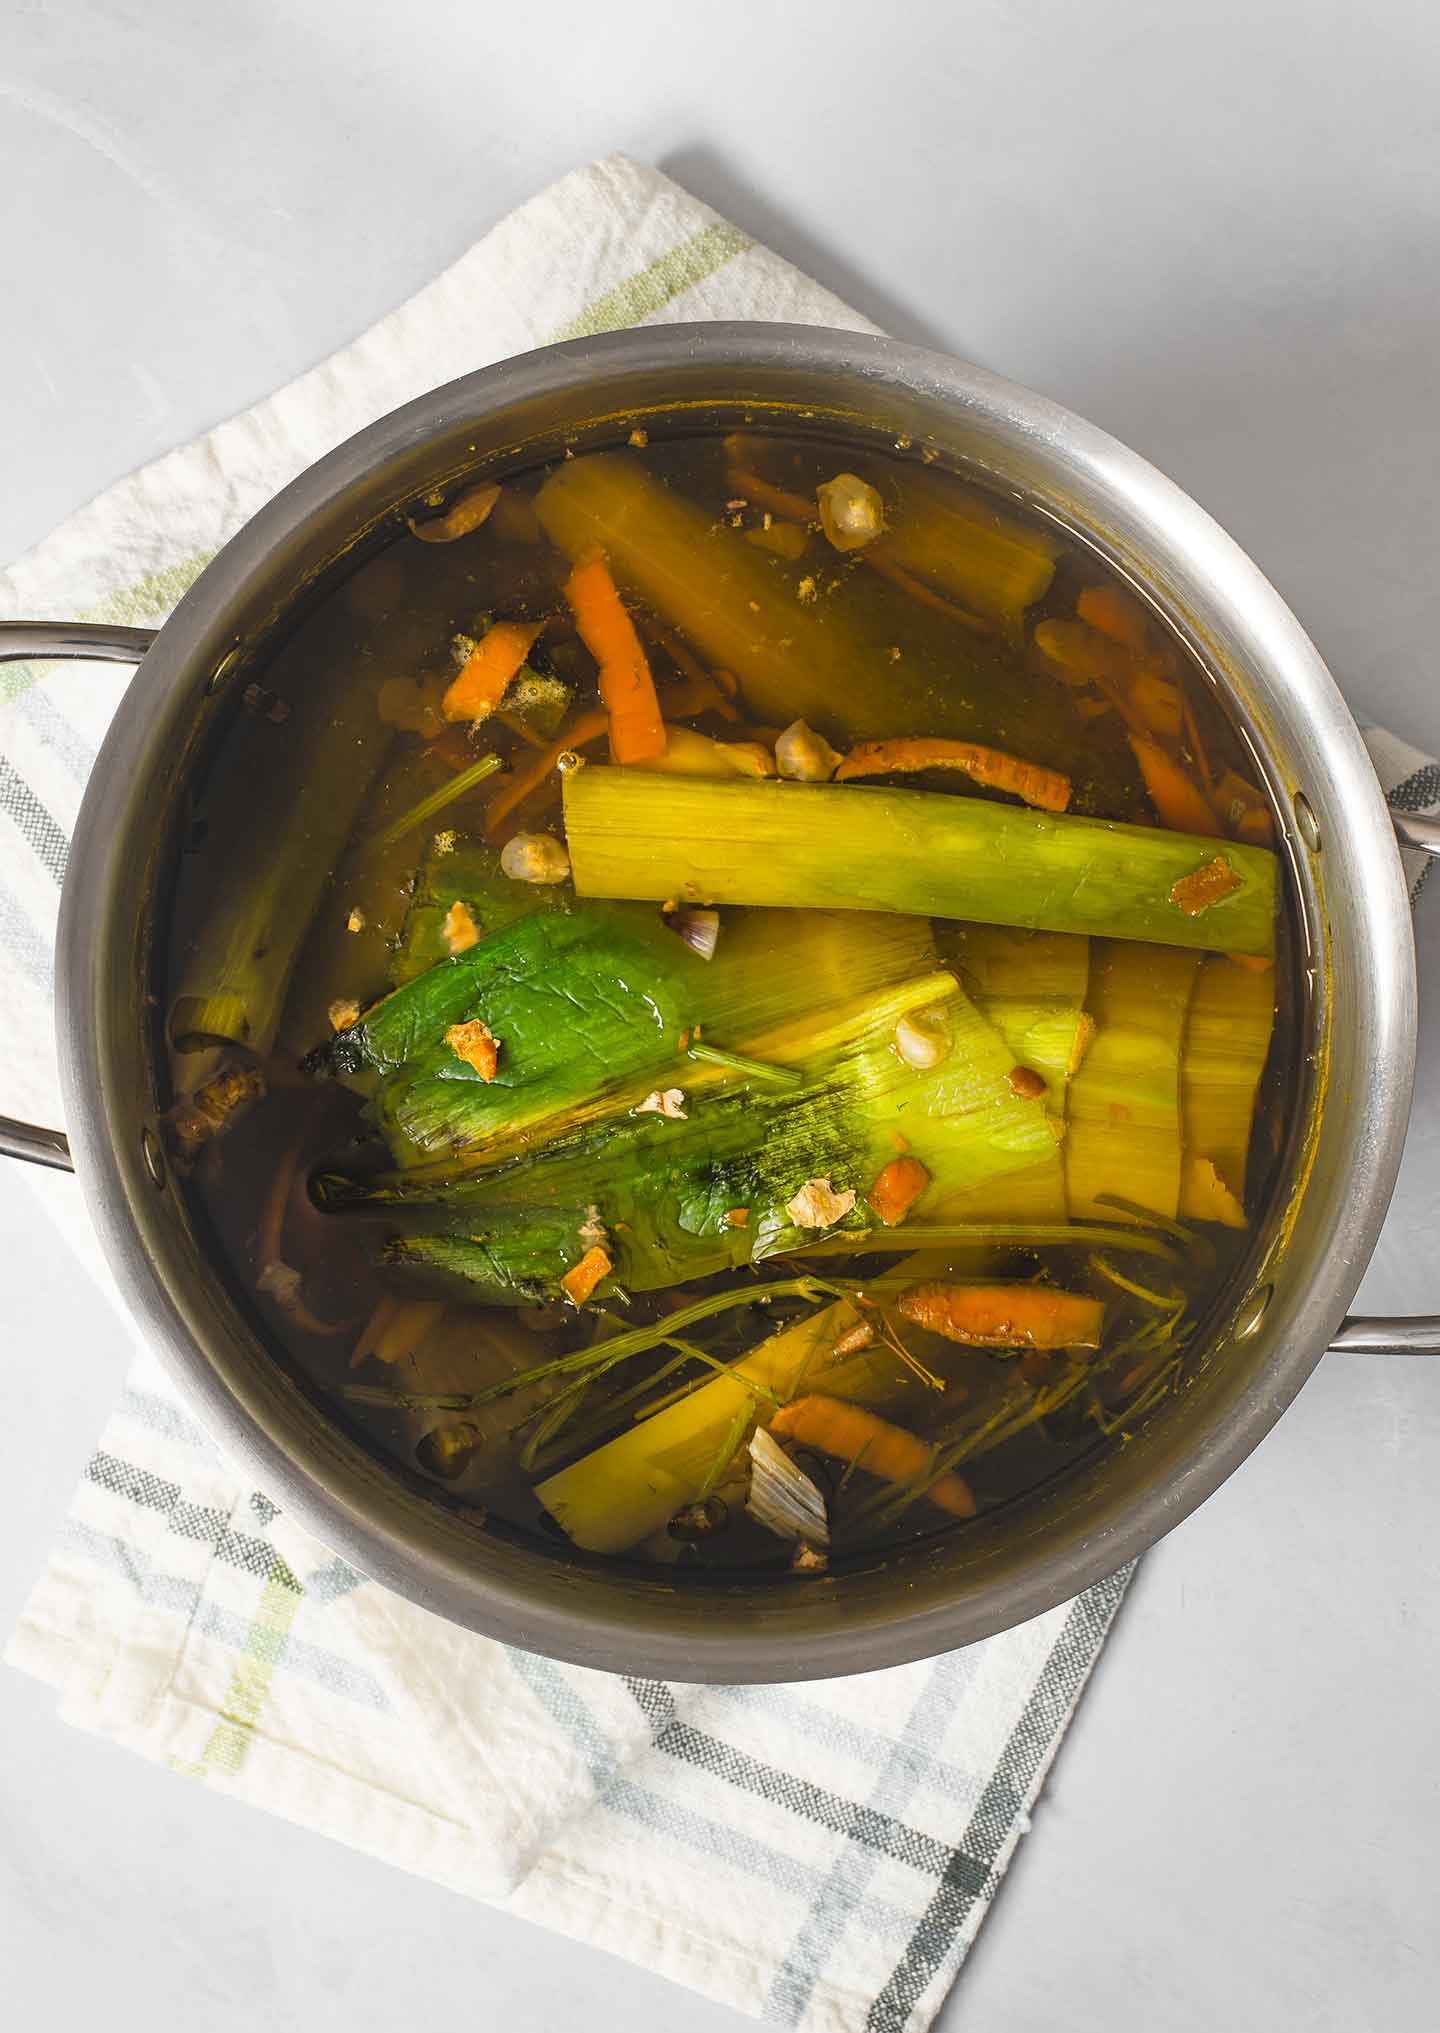 Top down view of homemade vegetable broth, before the vegetables have been strained, in a large pot with a dish towel underneath